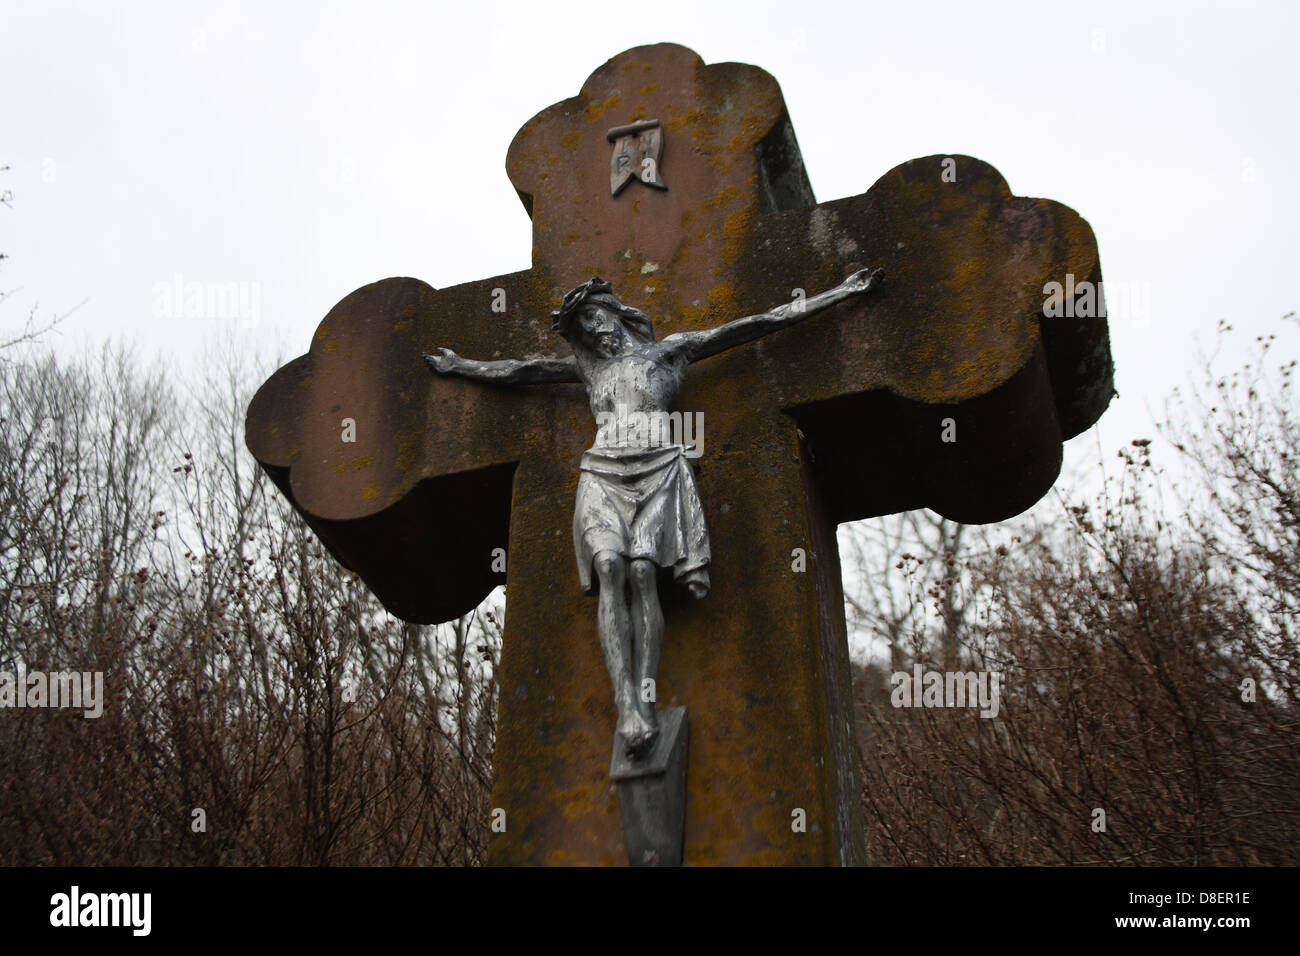 A sculpture of Jesus' crucifixion on the cross. Stock Photo